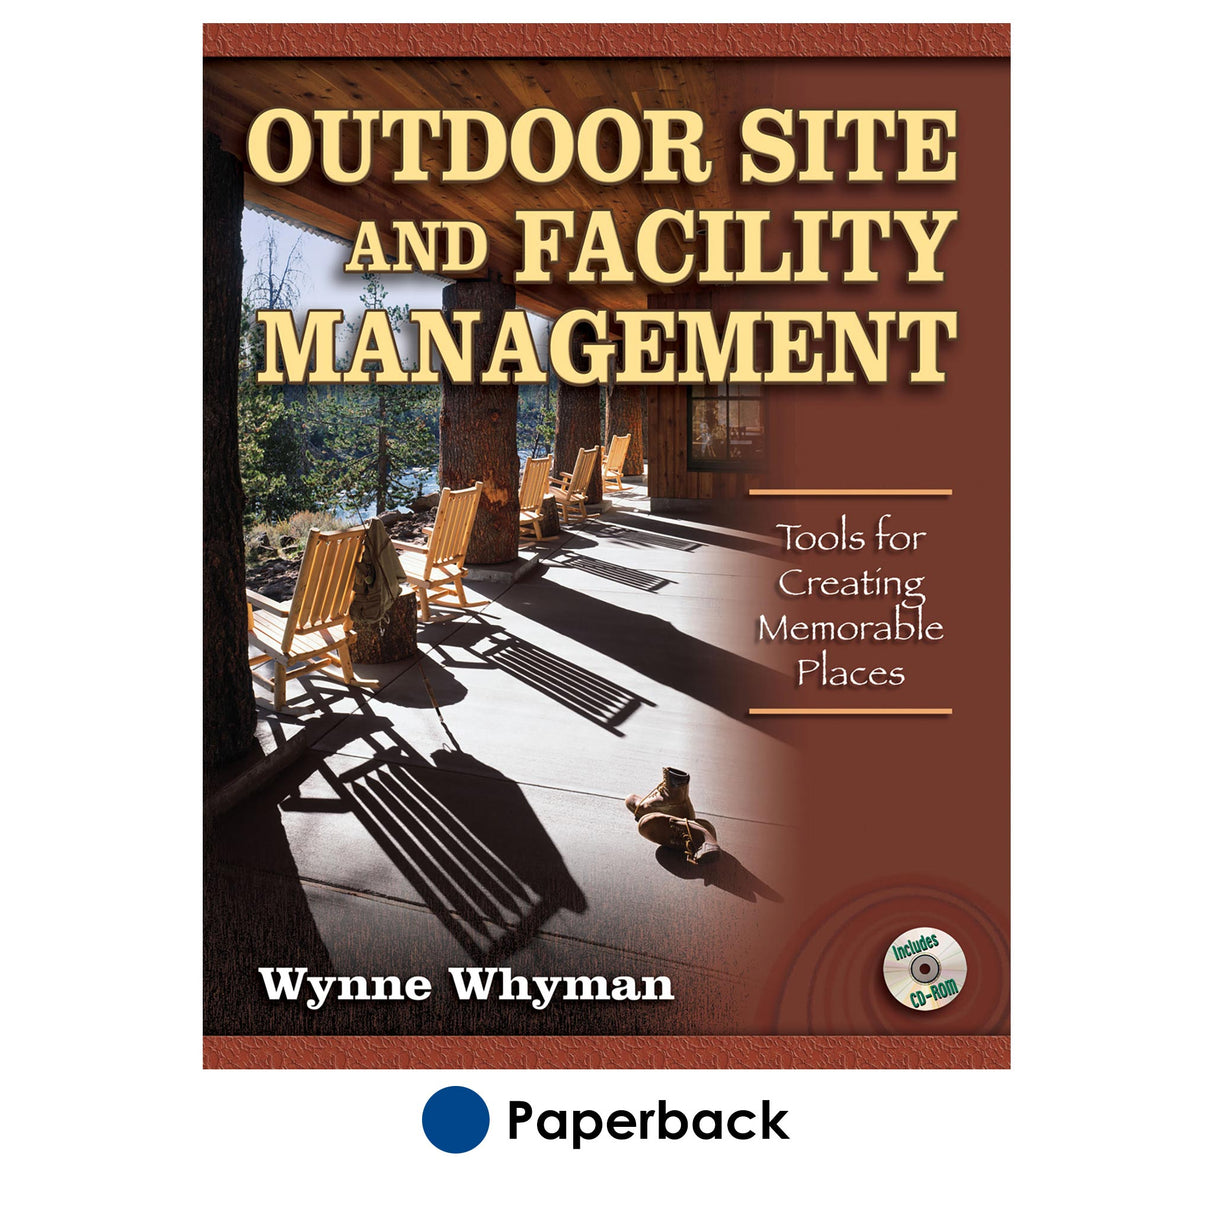 Outdoor Site and Facility Management